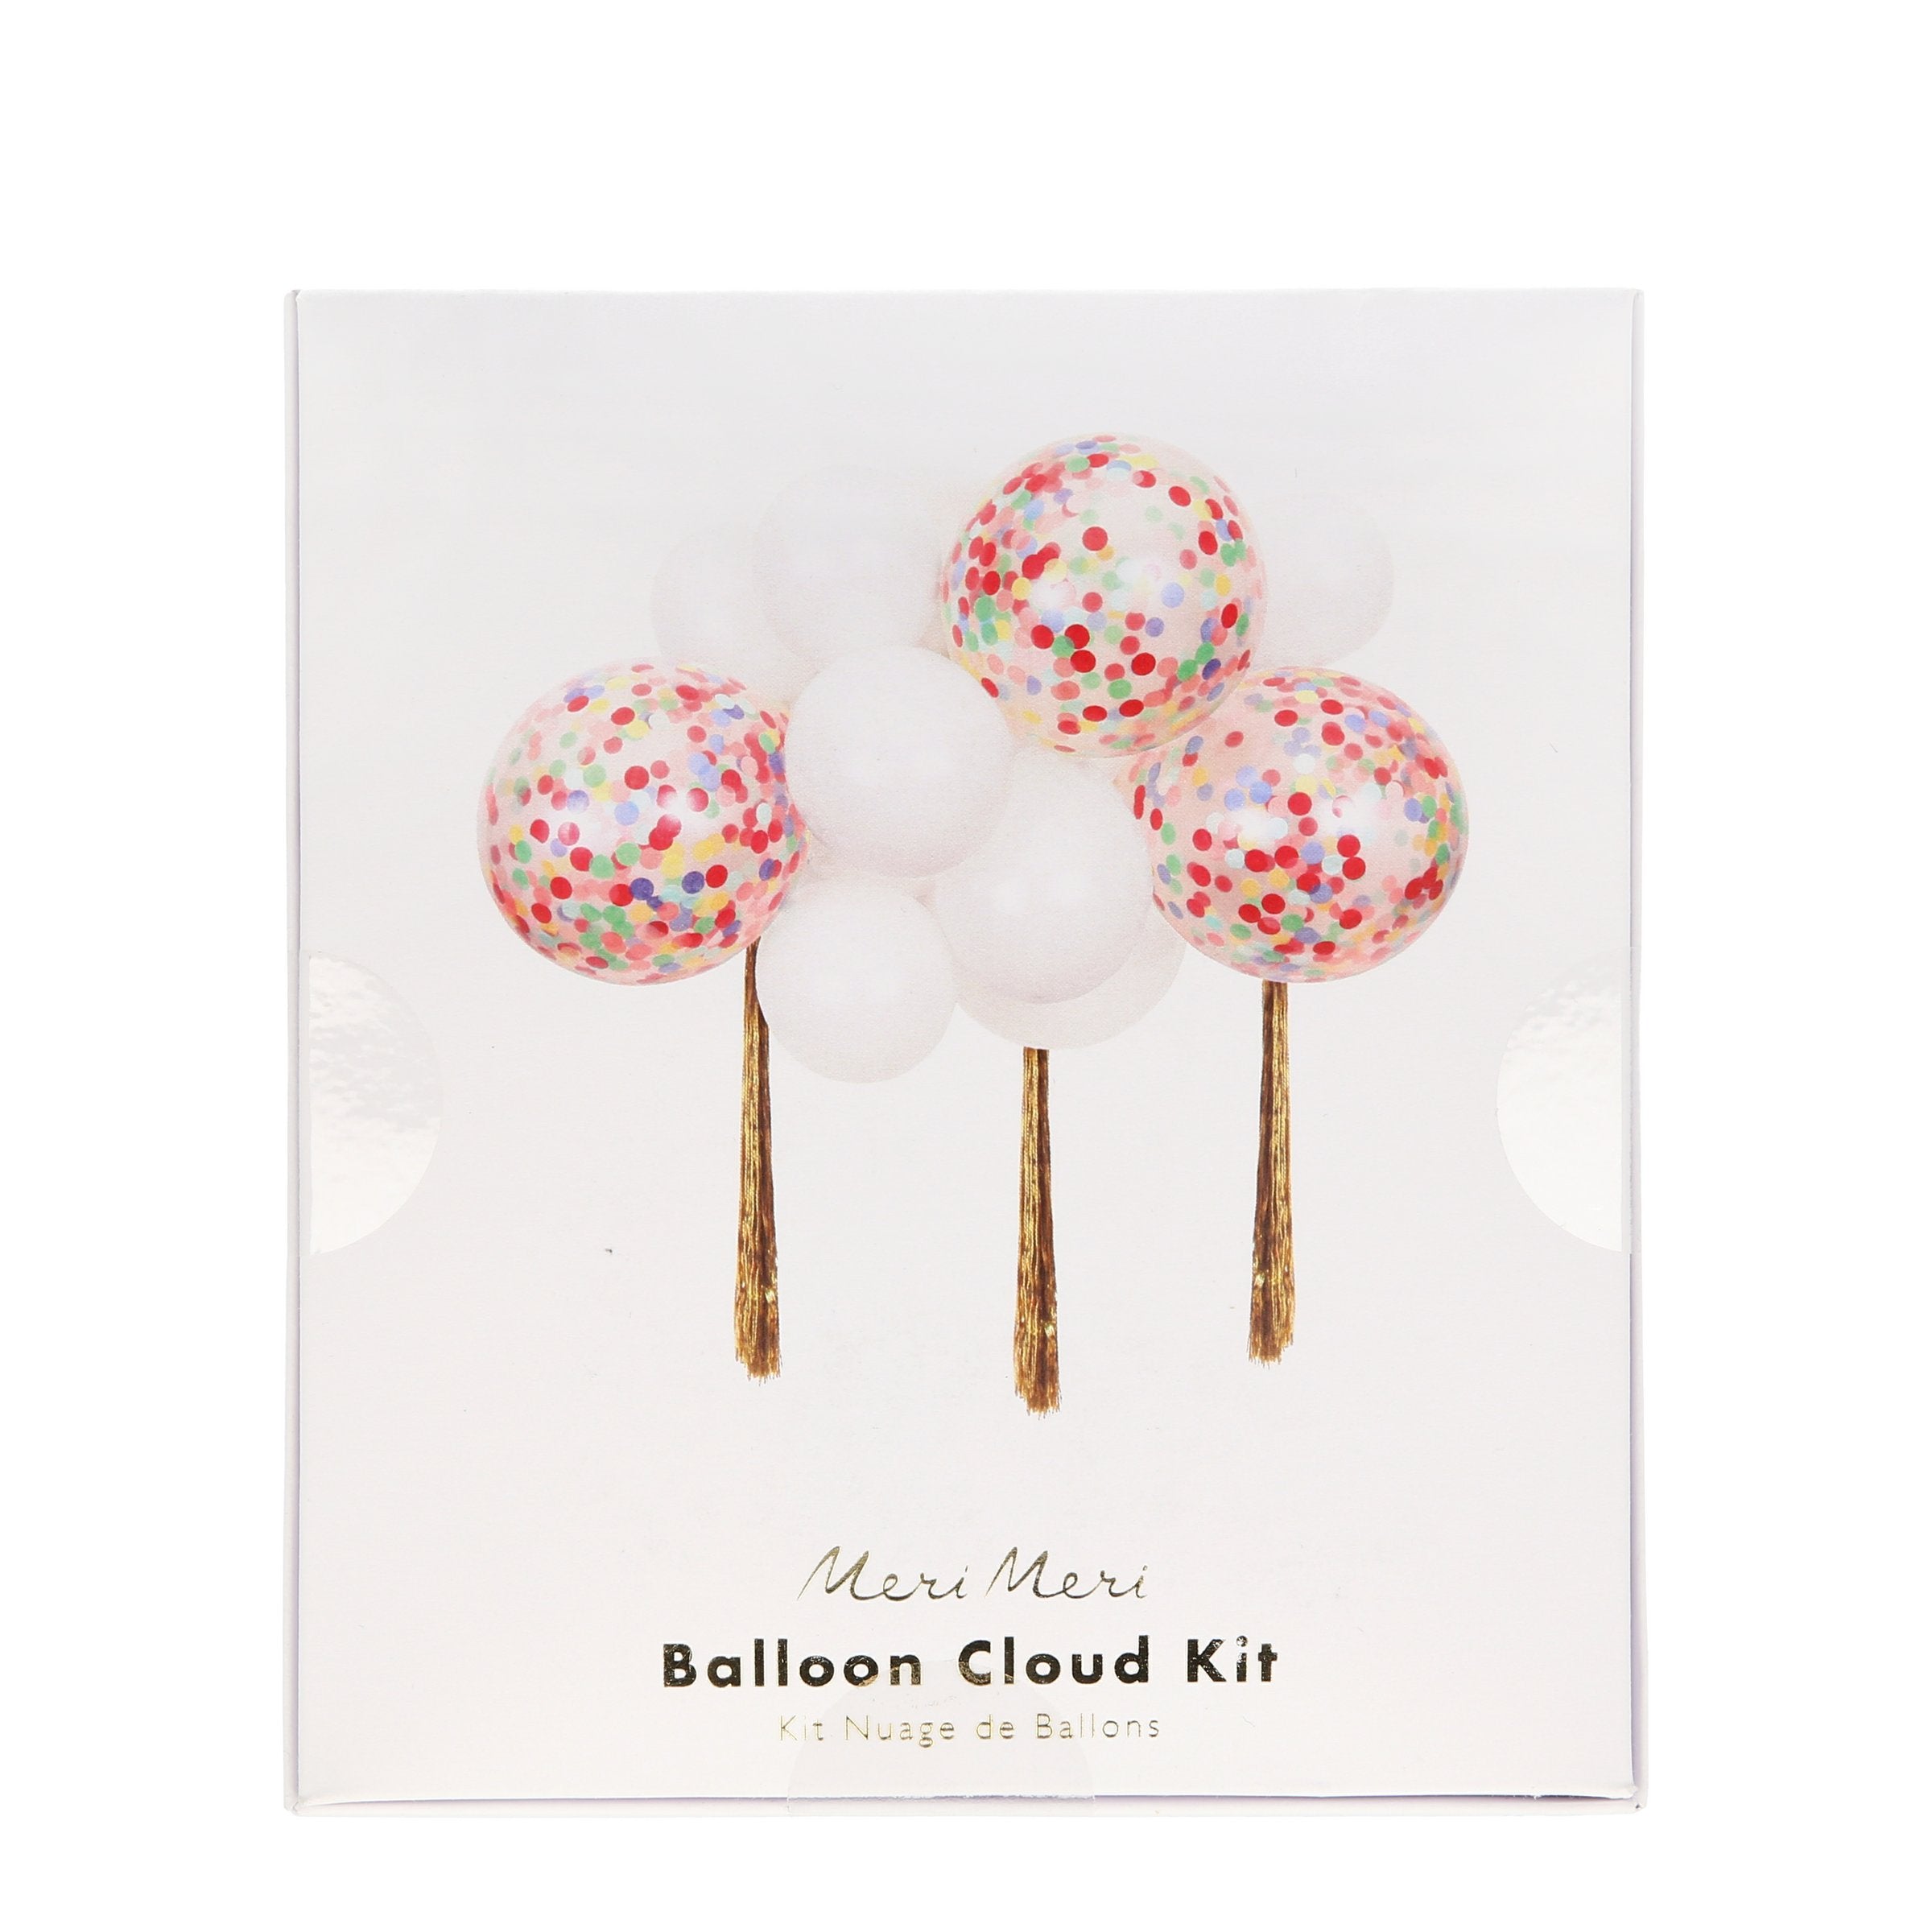 This wonderful balloon cloud kit has 14 balloons, 4 of which are pre-filled with confetti, and three gold streamers.